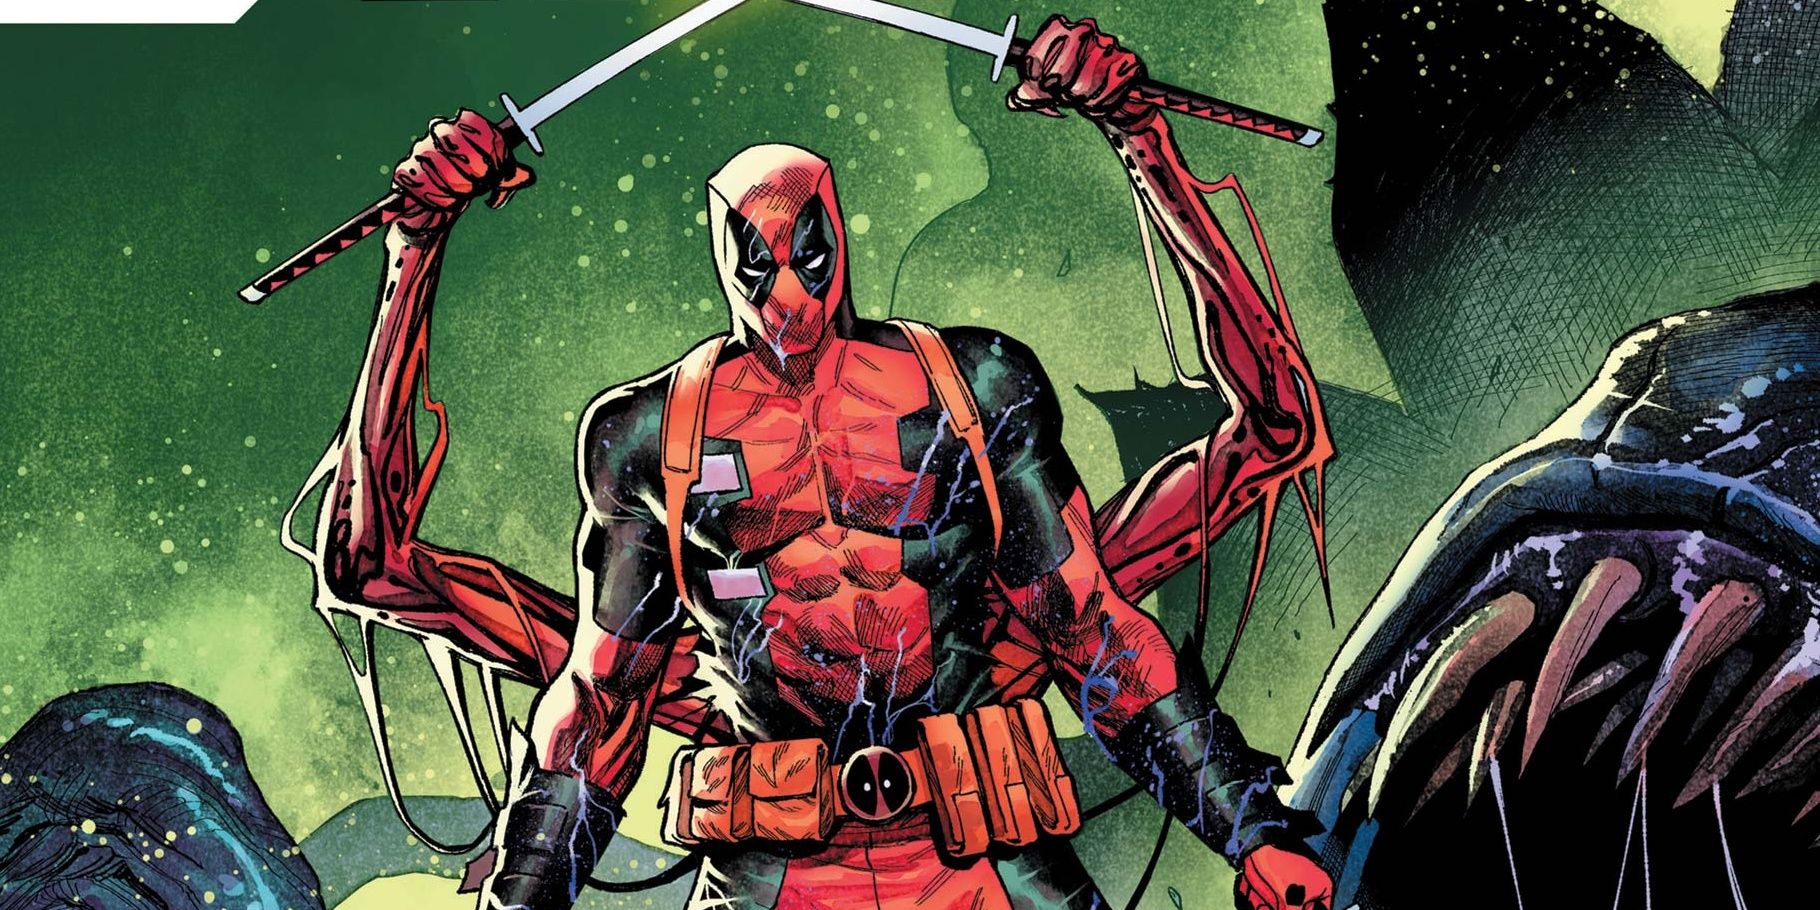 Deadpool gets a new power-up in Marvel Comics